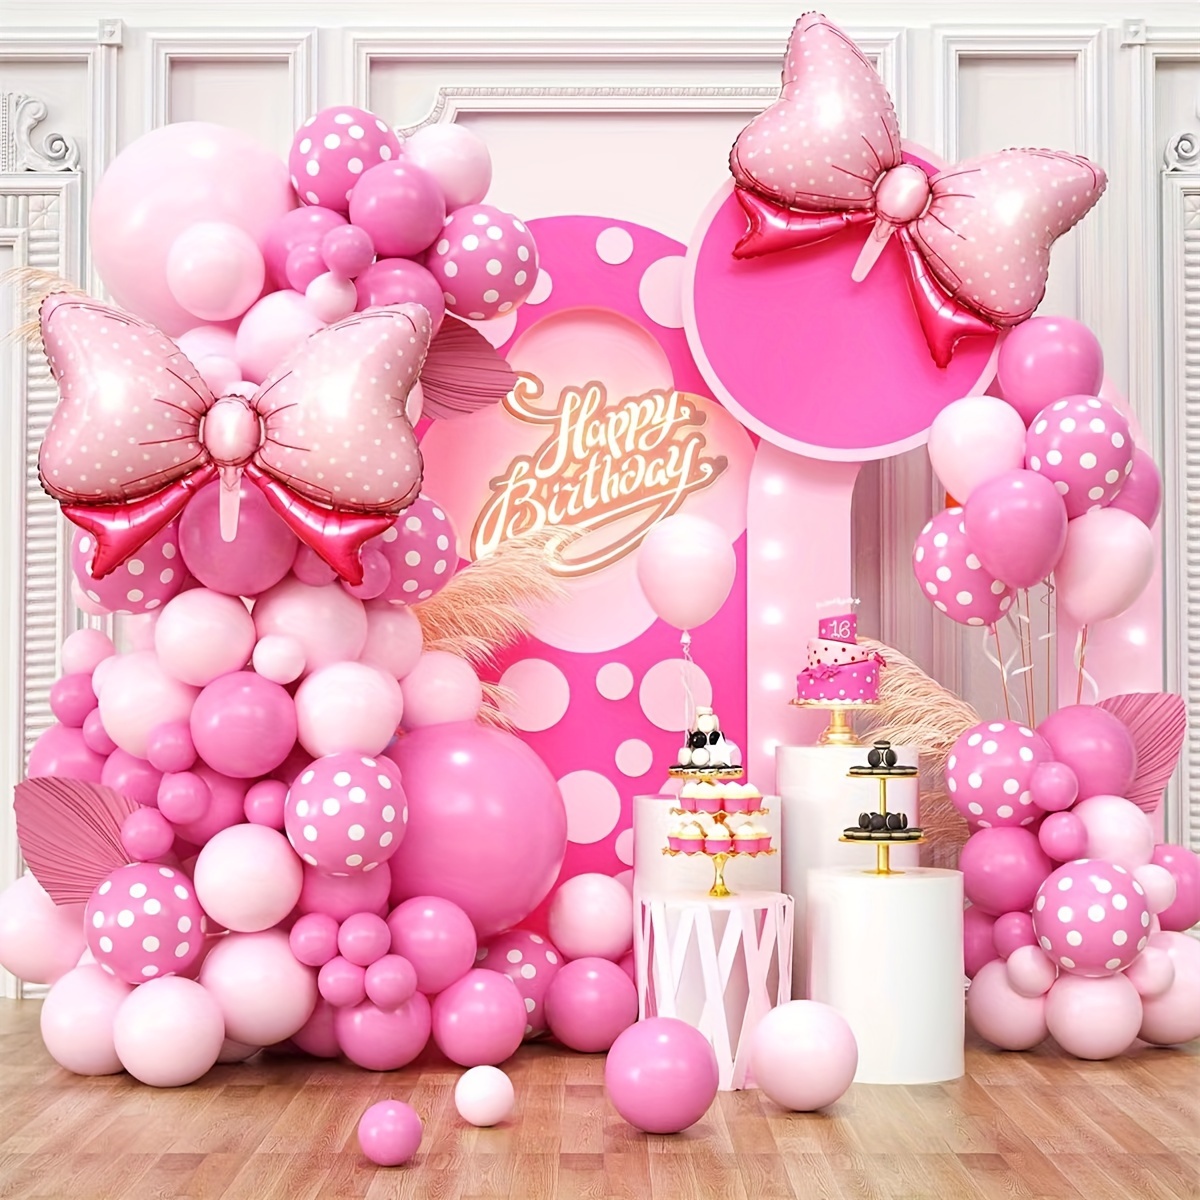 

100pcs Pink Balloon Arch Kit With Bow Foil Balloons, Polka Dot Latex Balloons For Birthday, Wedding Decorations - All Seasons, Ages 14+